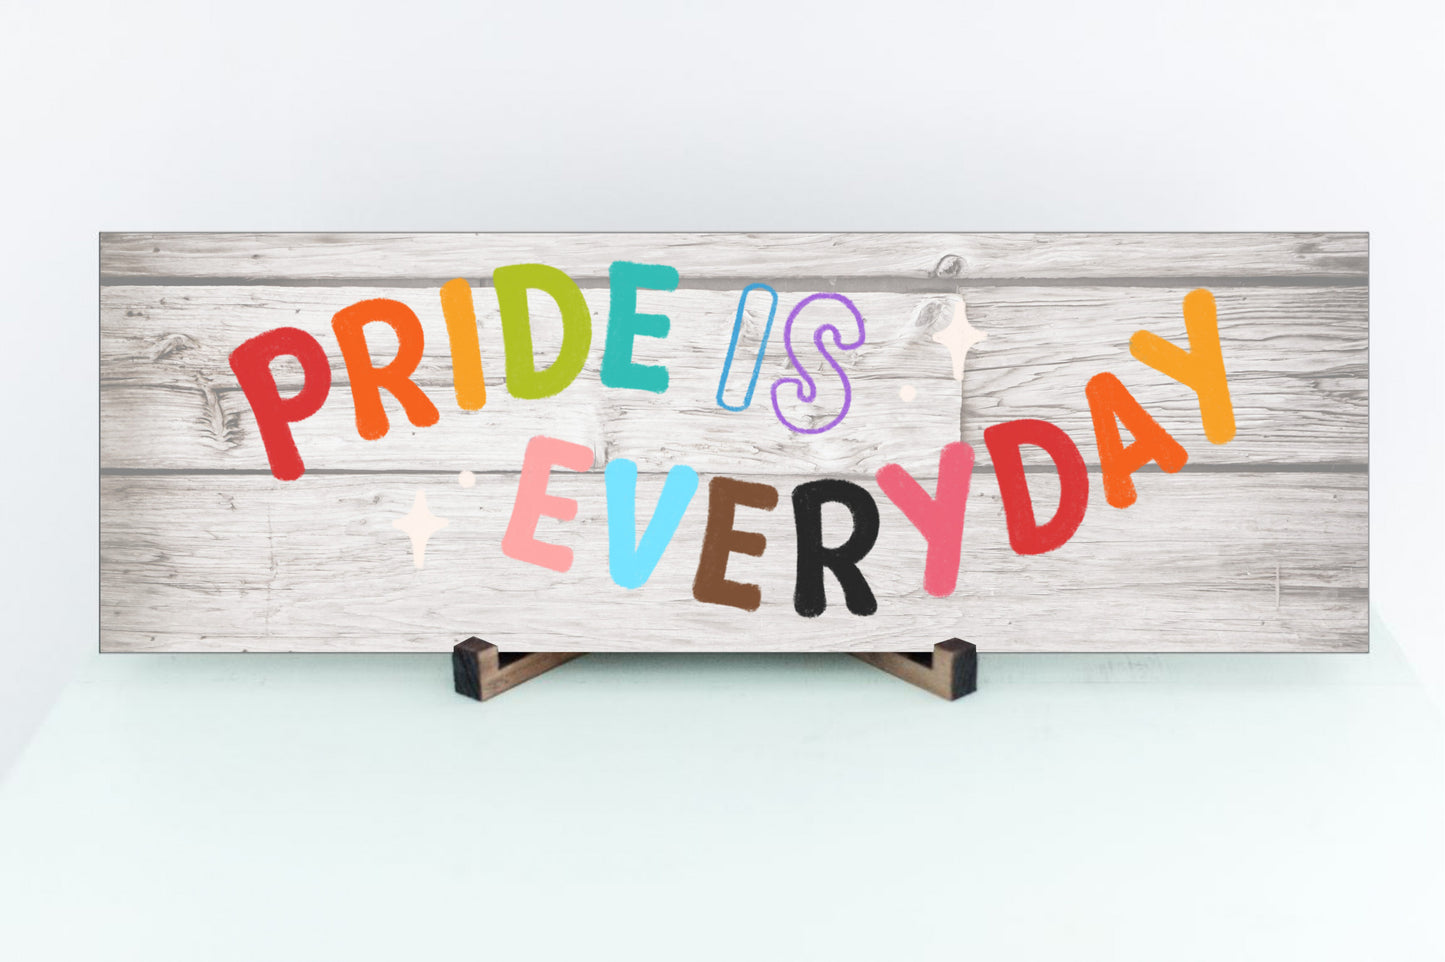 Pride Is Everyday Sign for Wall or Tabletop Display